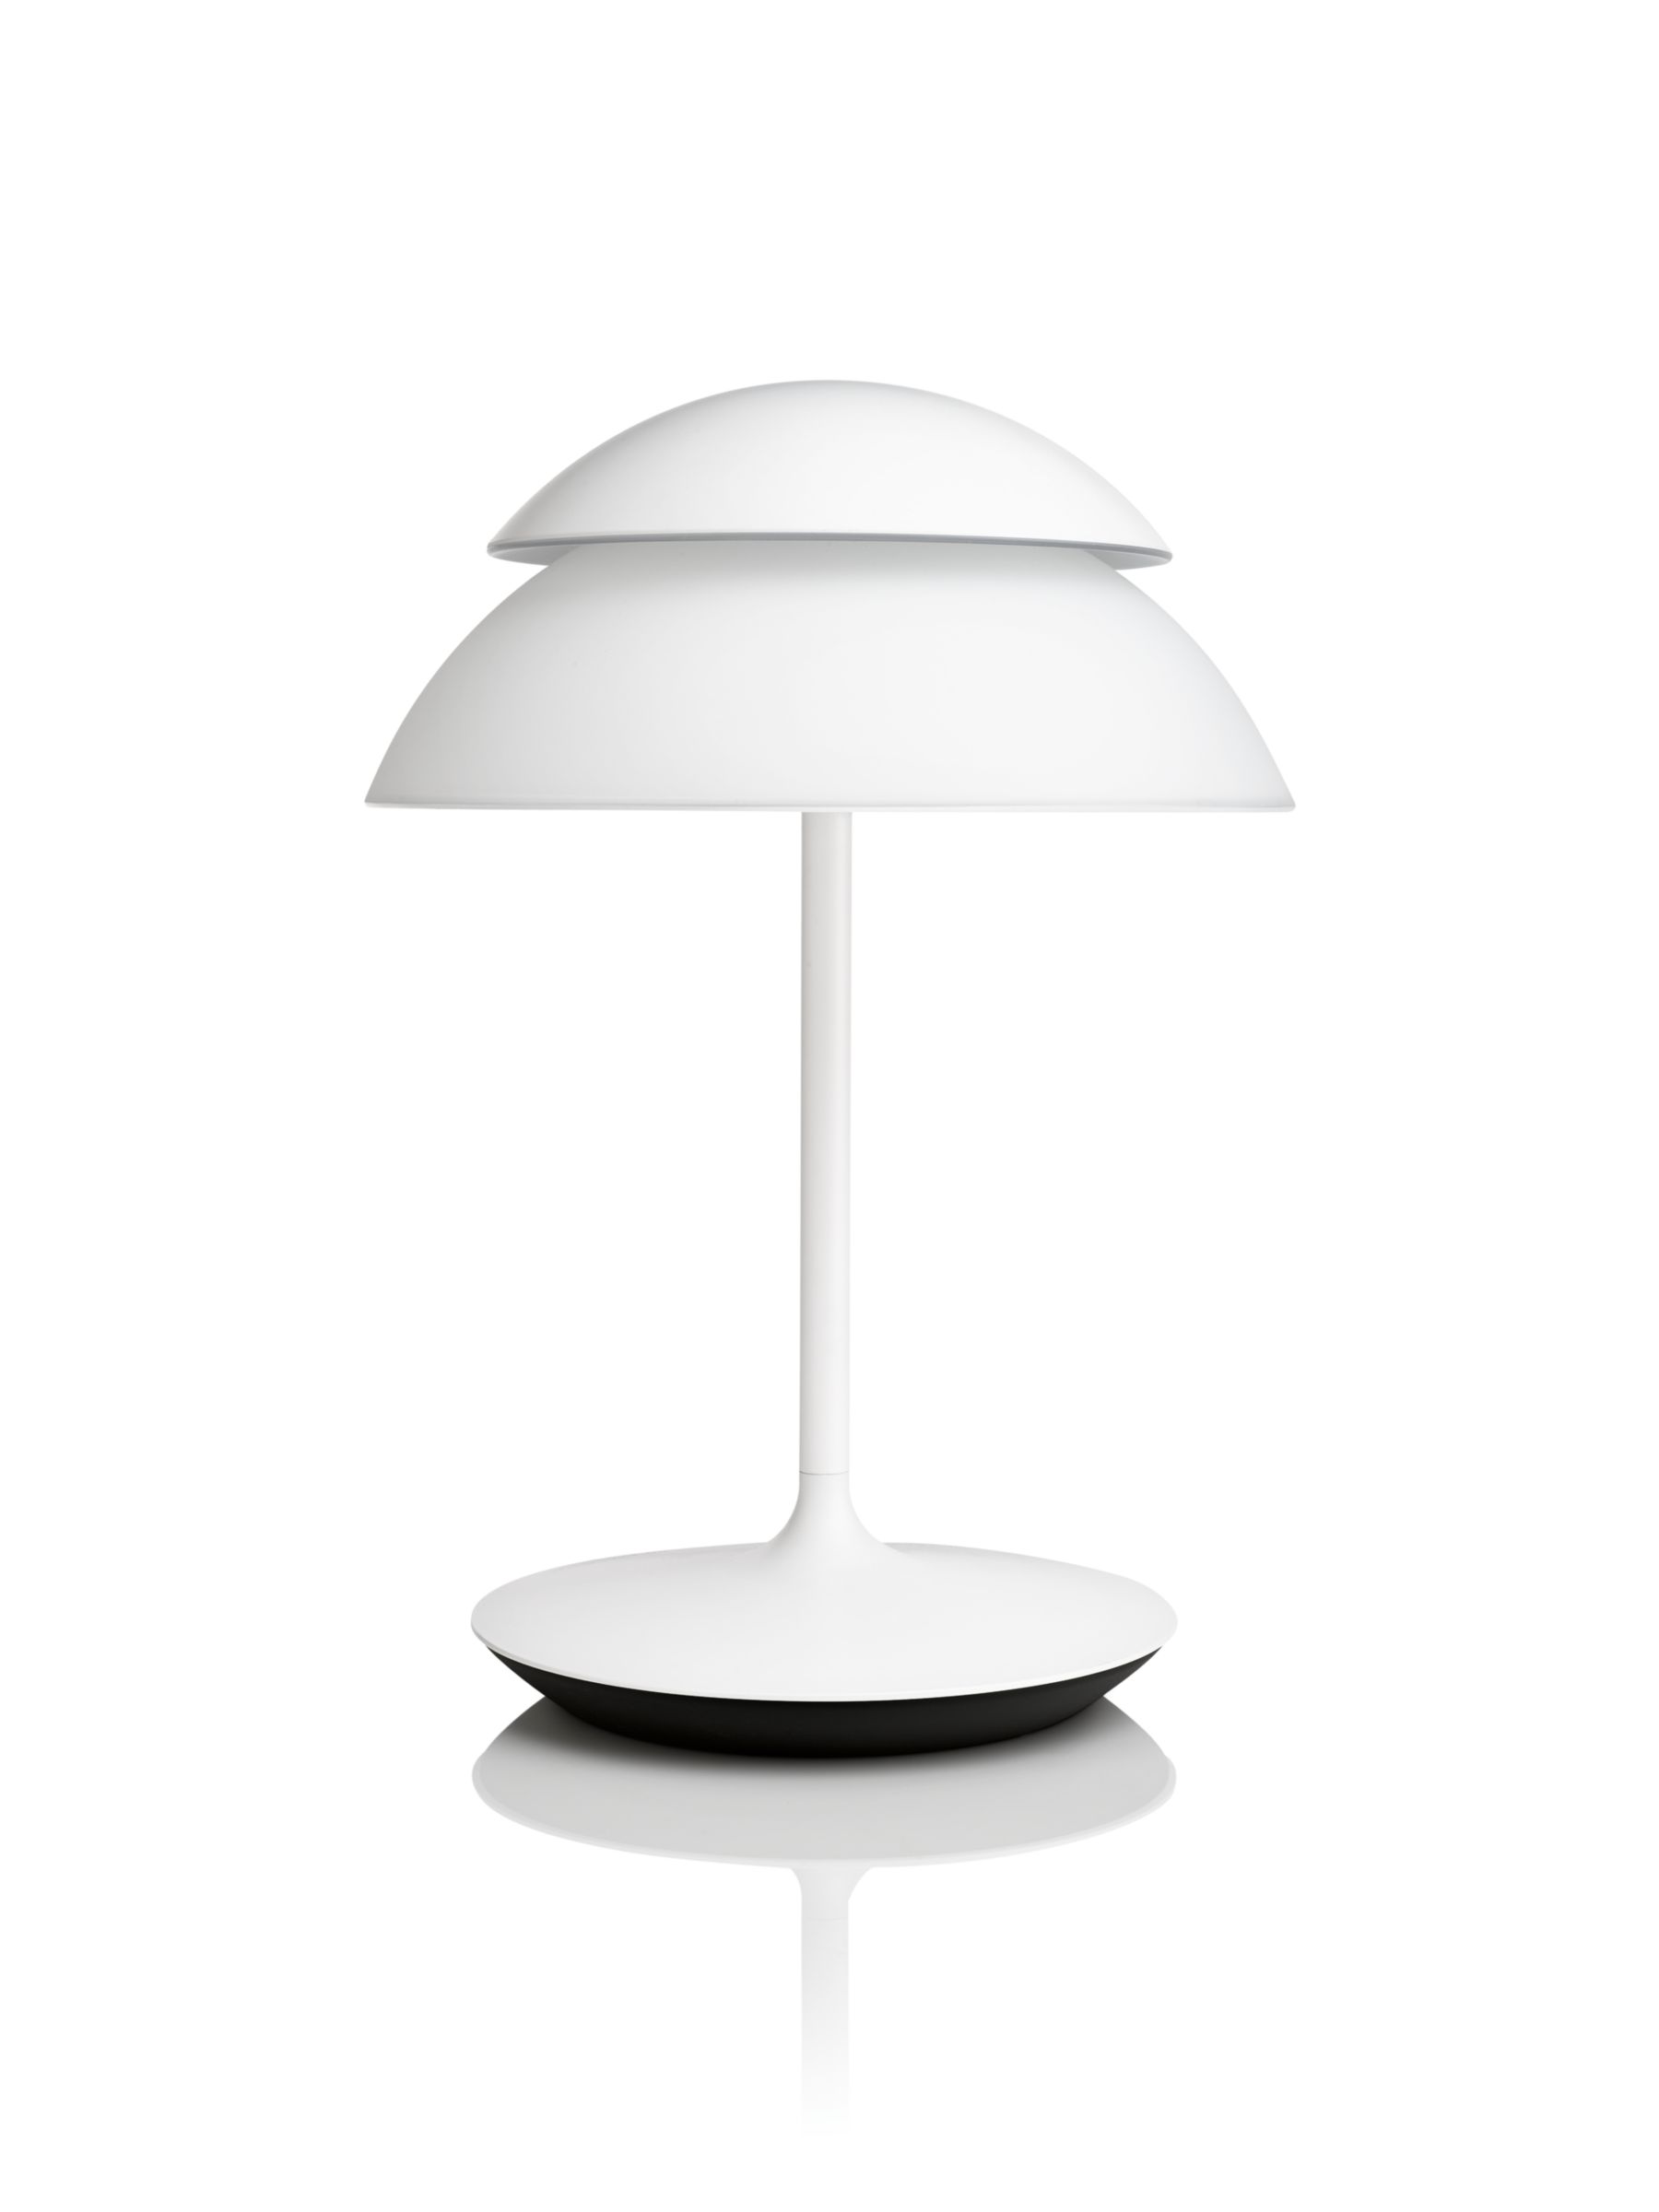 Altaar Maan oppervlakte hek Hue White and color ambiance Beyond table lamp | Philips Hue IN